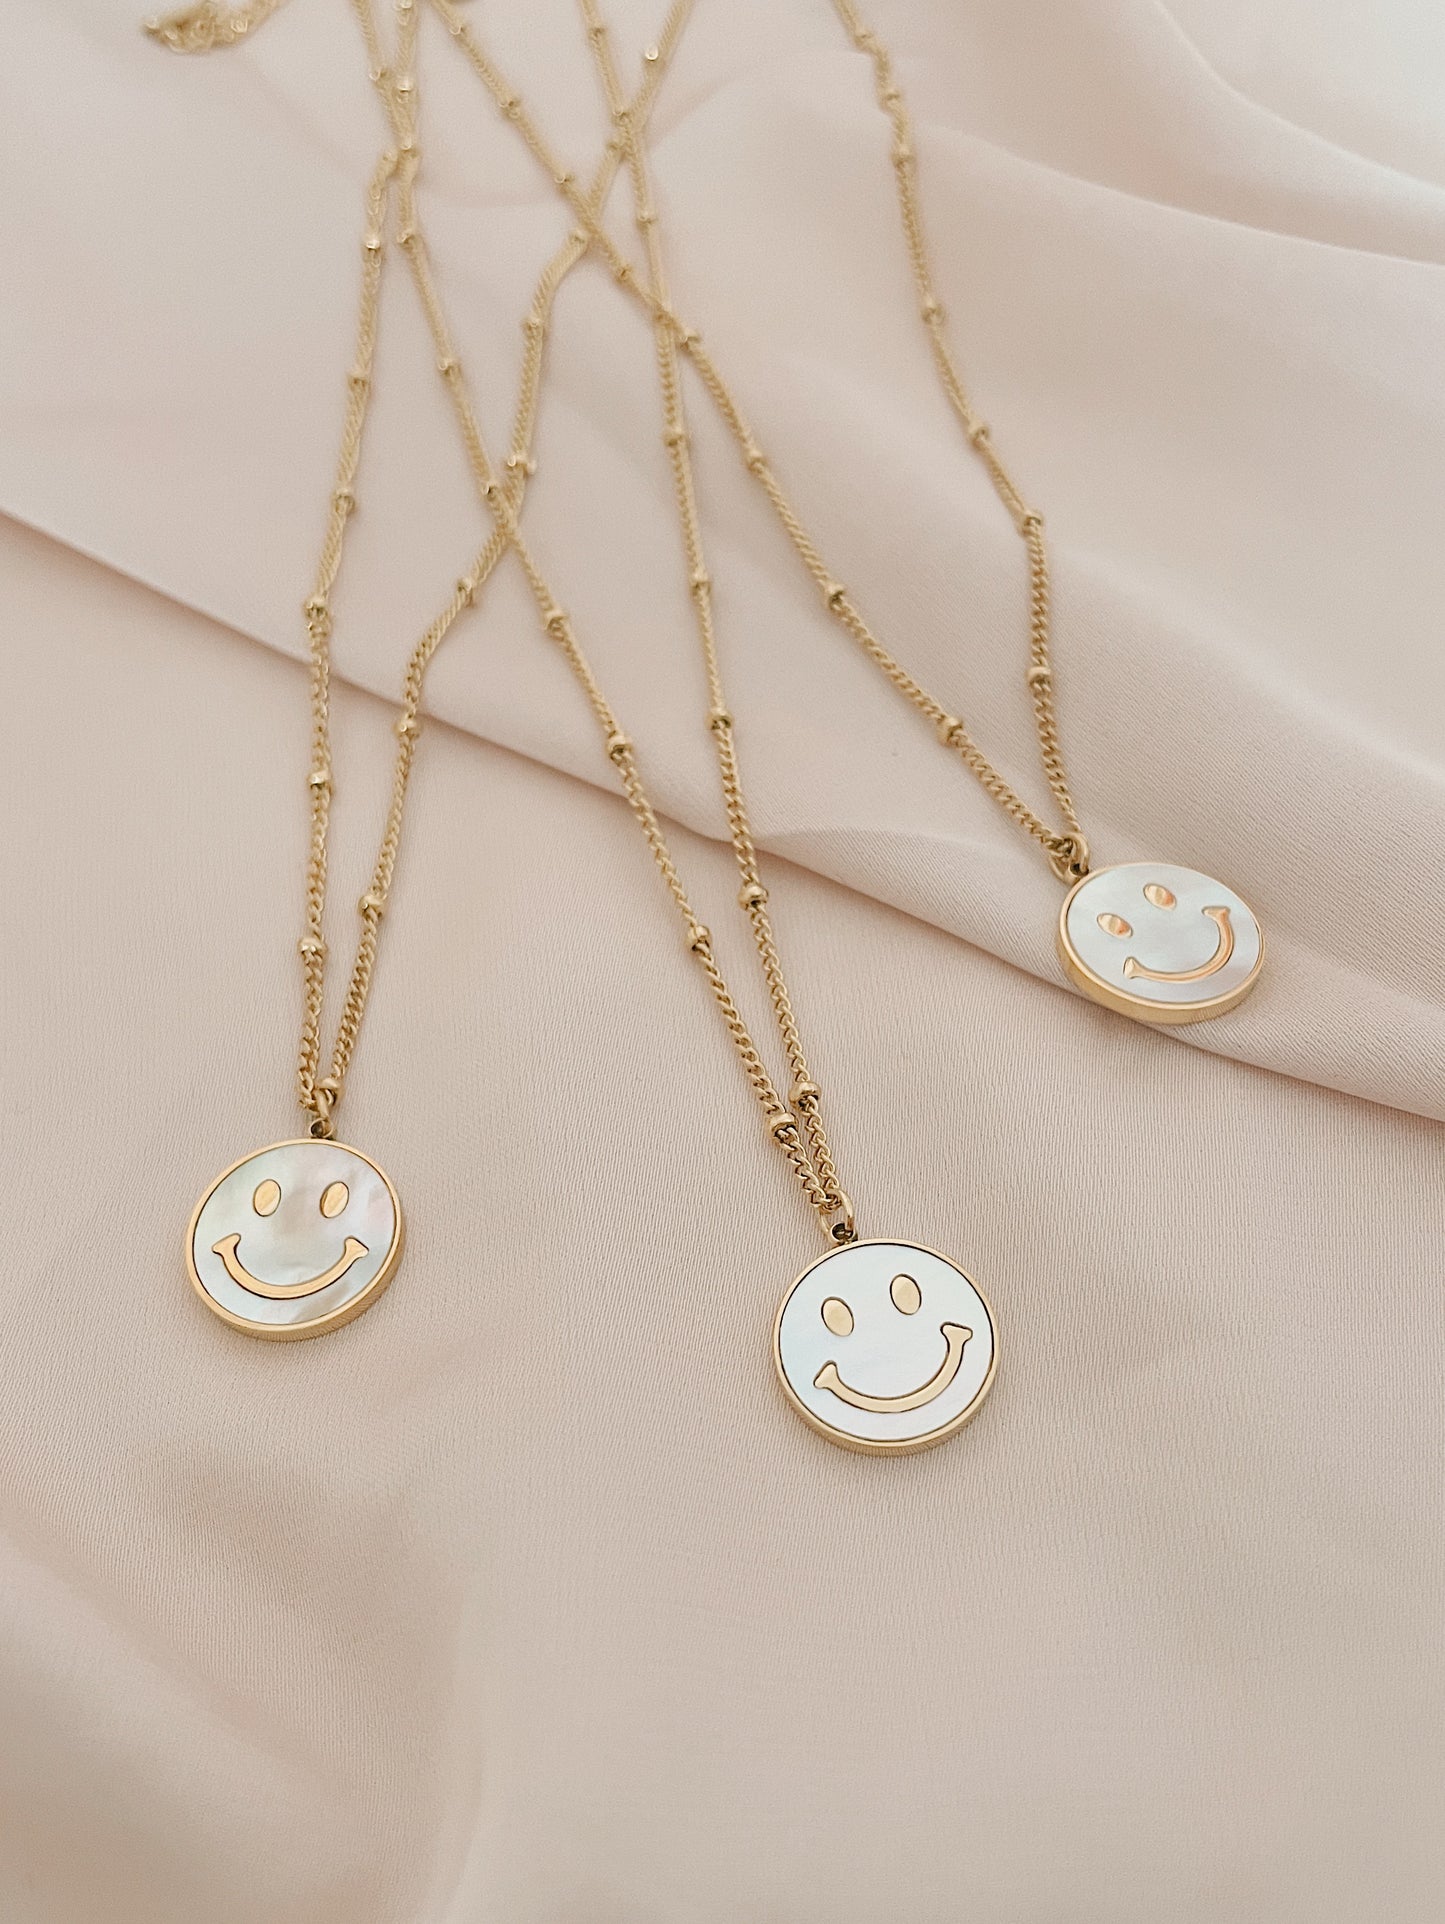 PEARL SMILEY - 18k gold plated necklace with pearl smiley charm